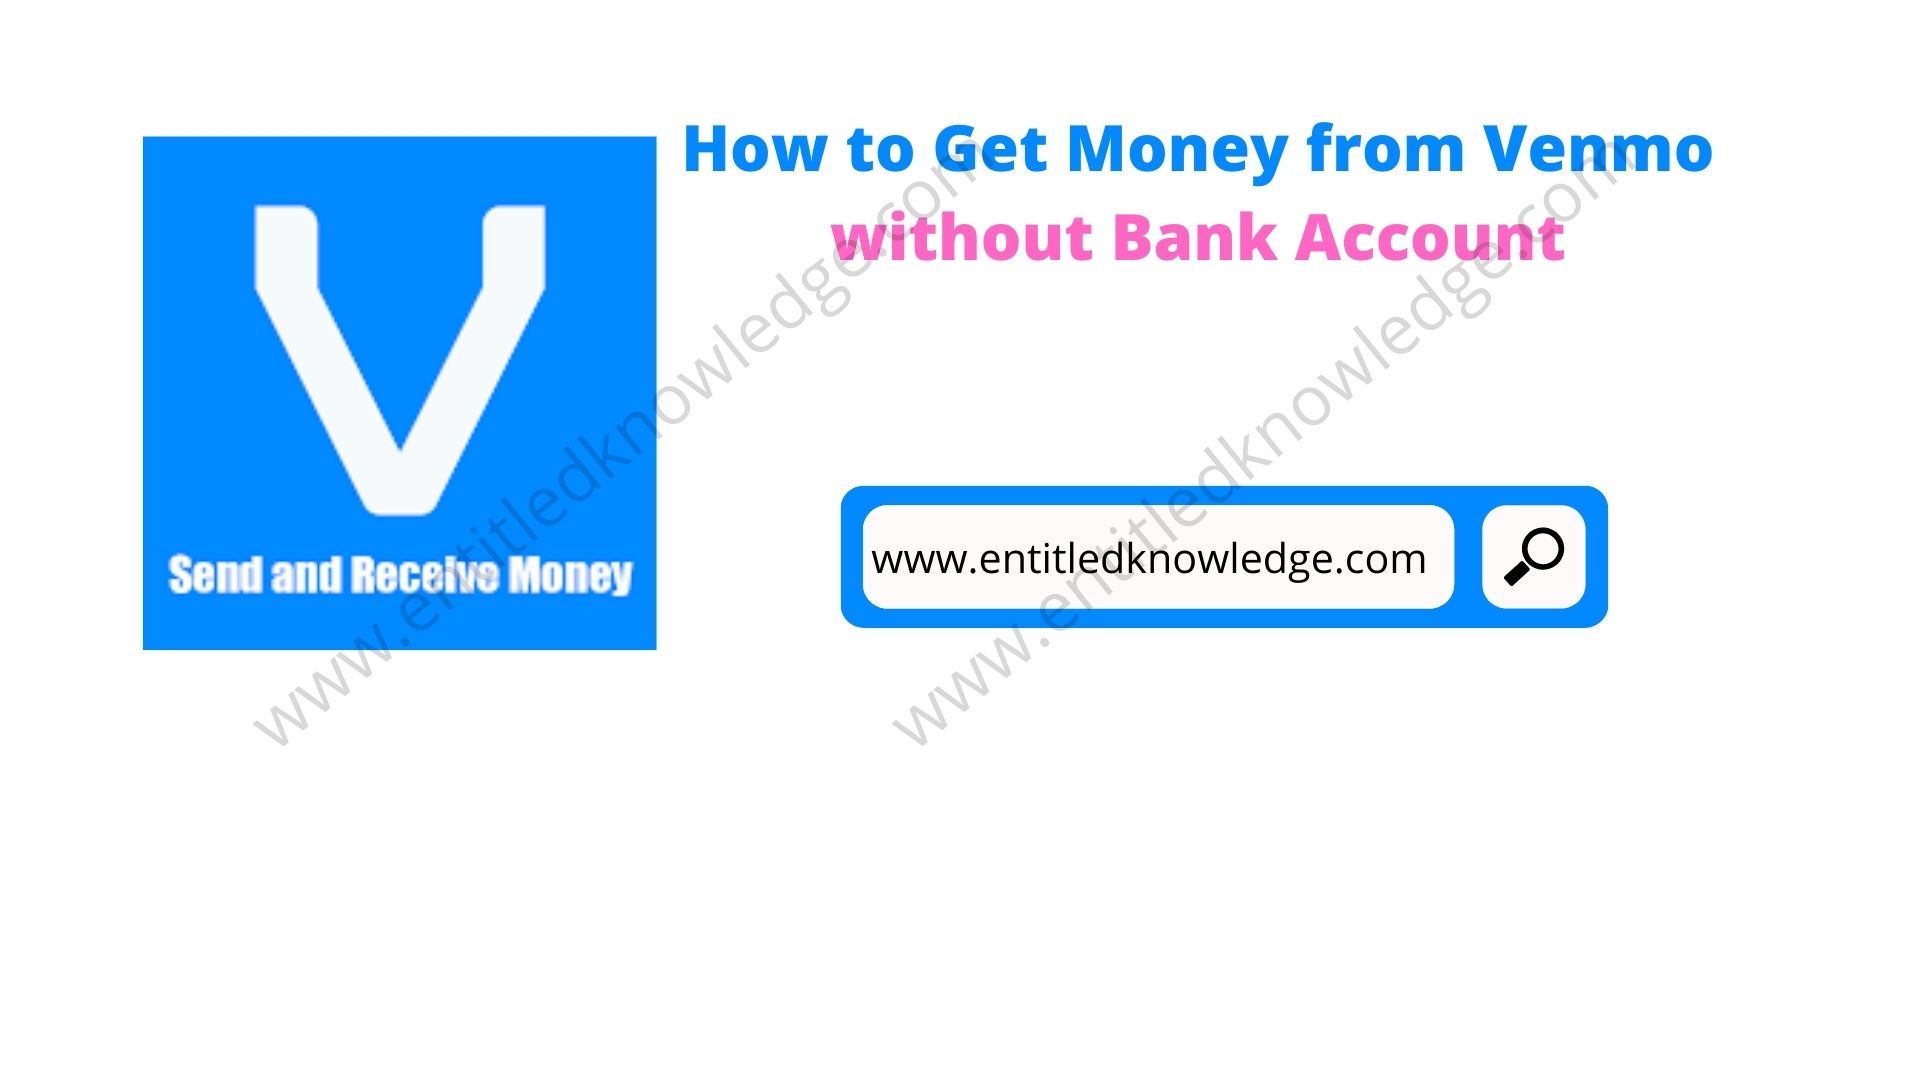 Get Money from Venmo without Bank Account